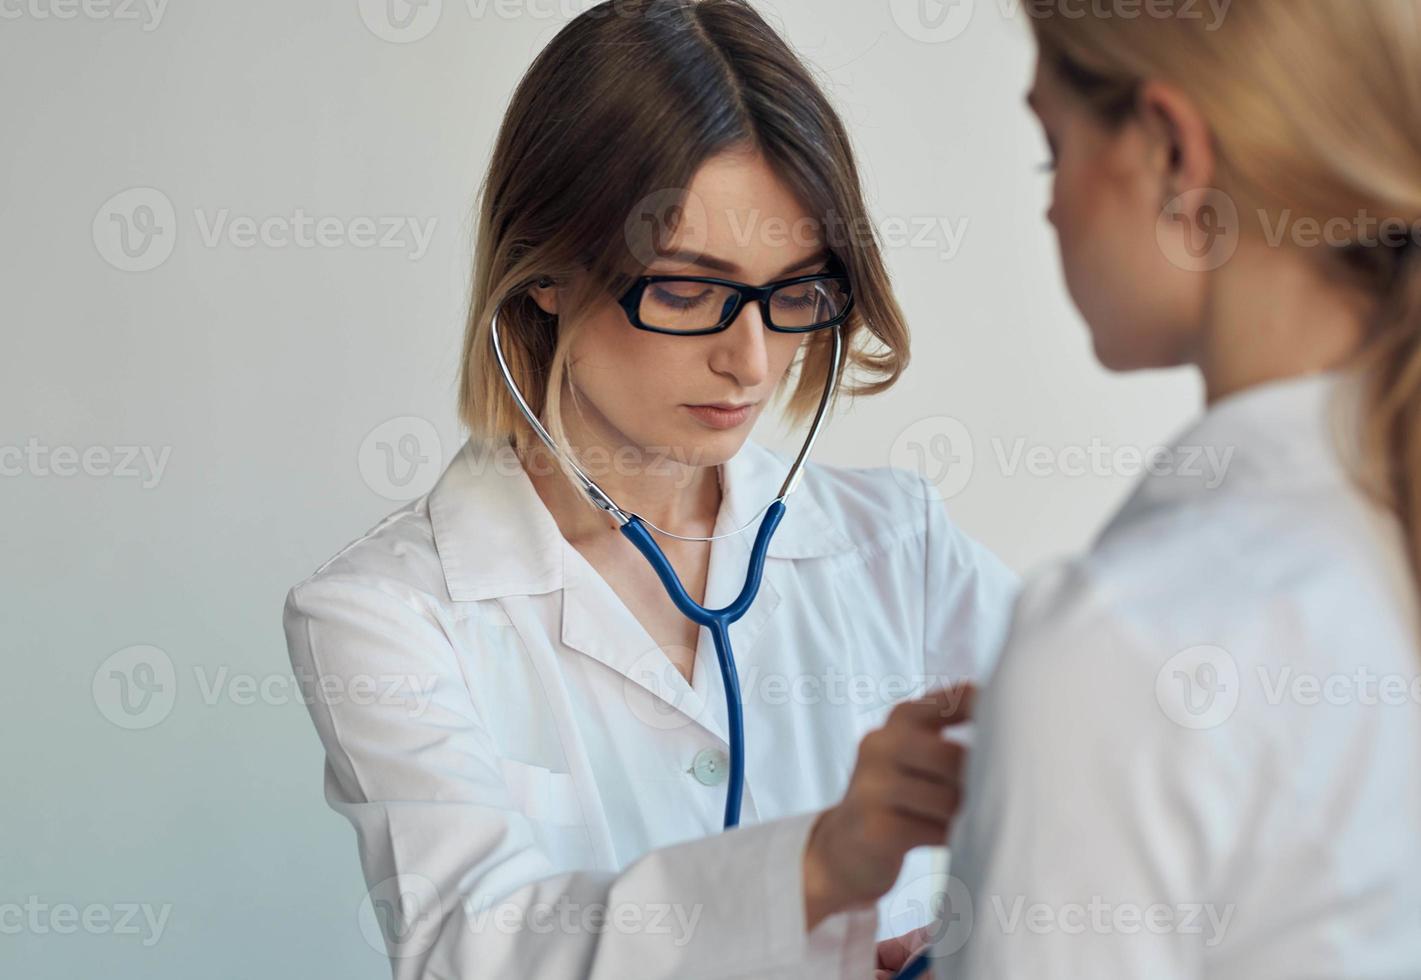 Woman professional doctor with glasses stethoscope patient health photo